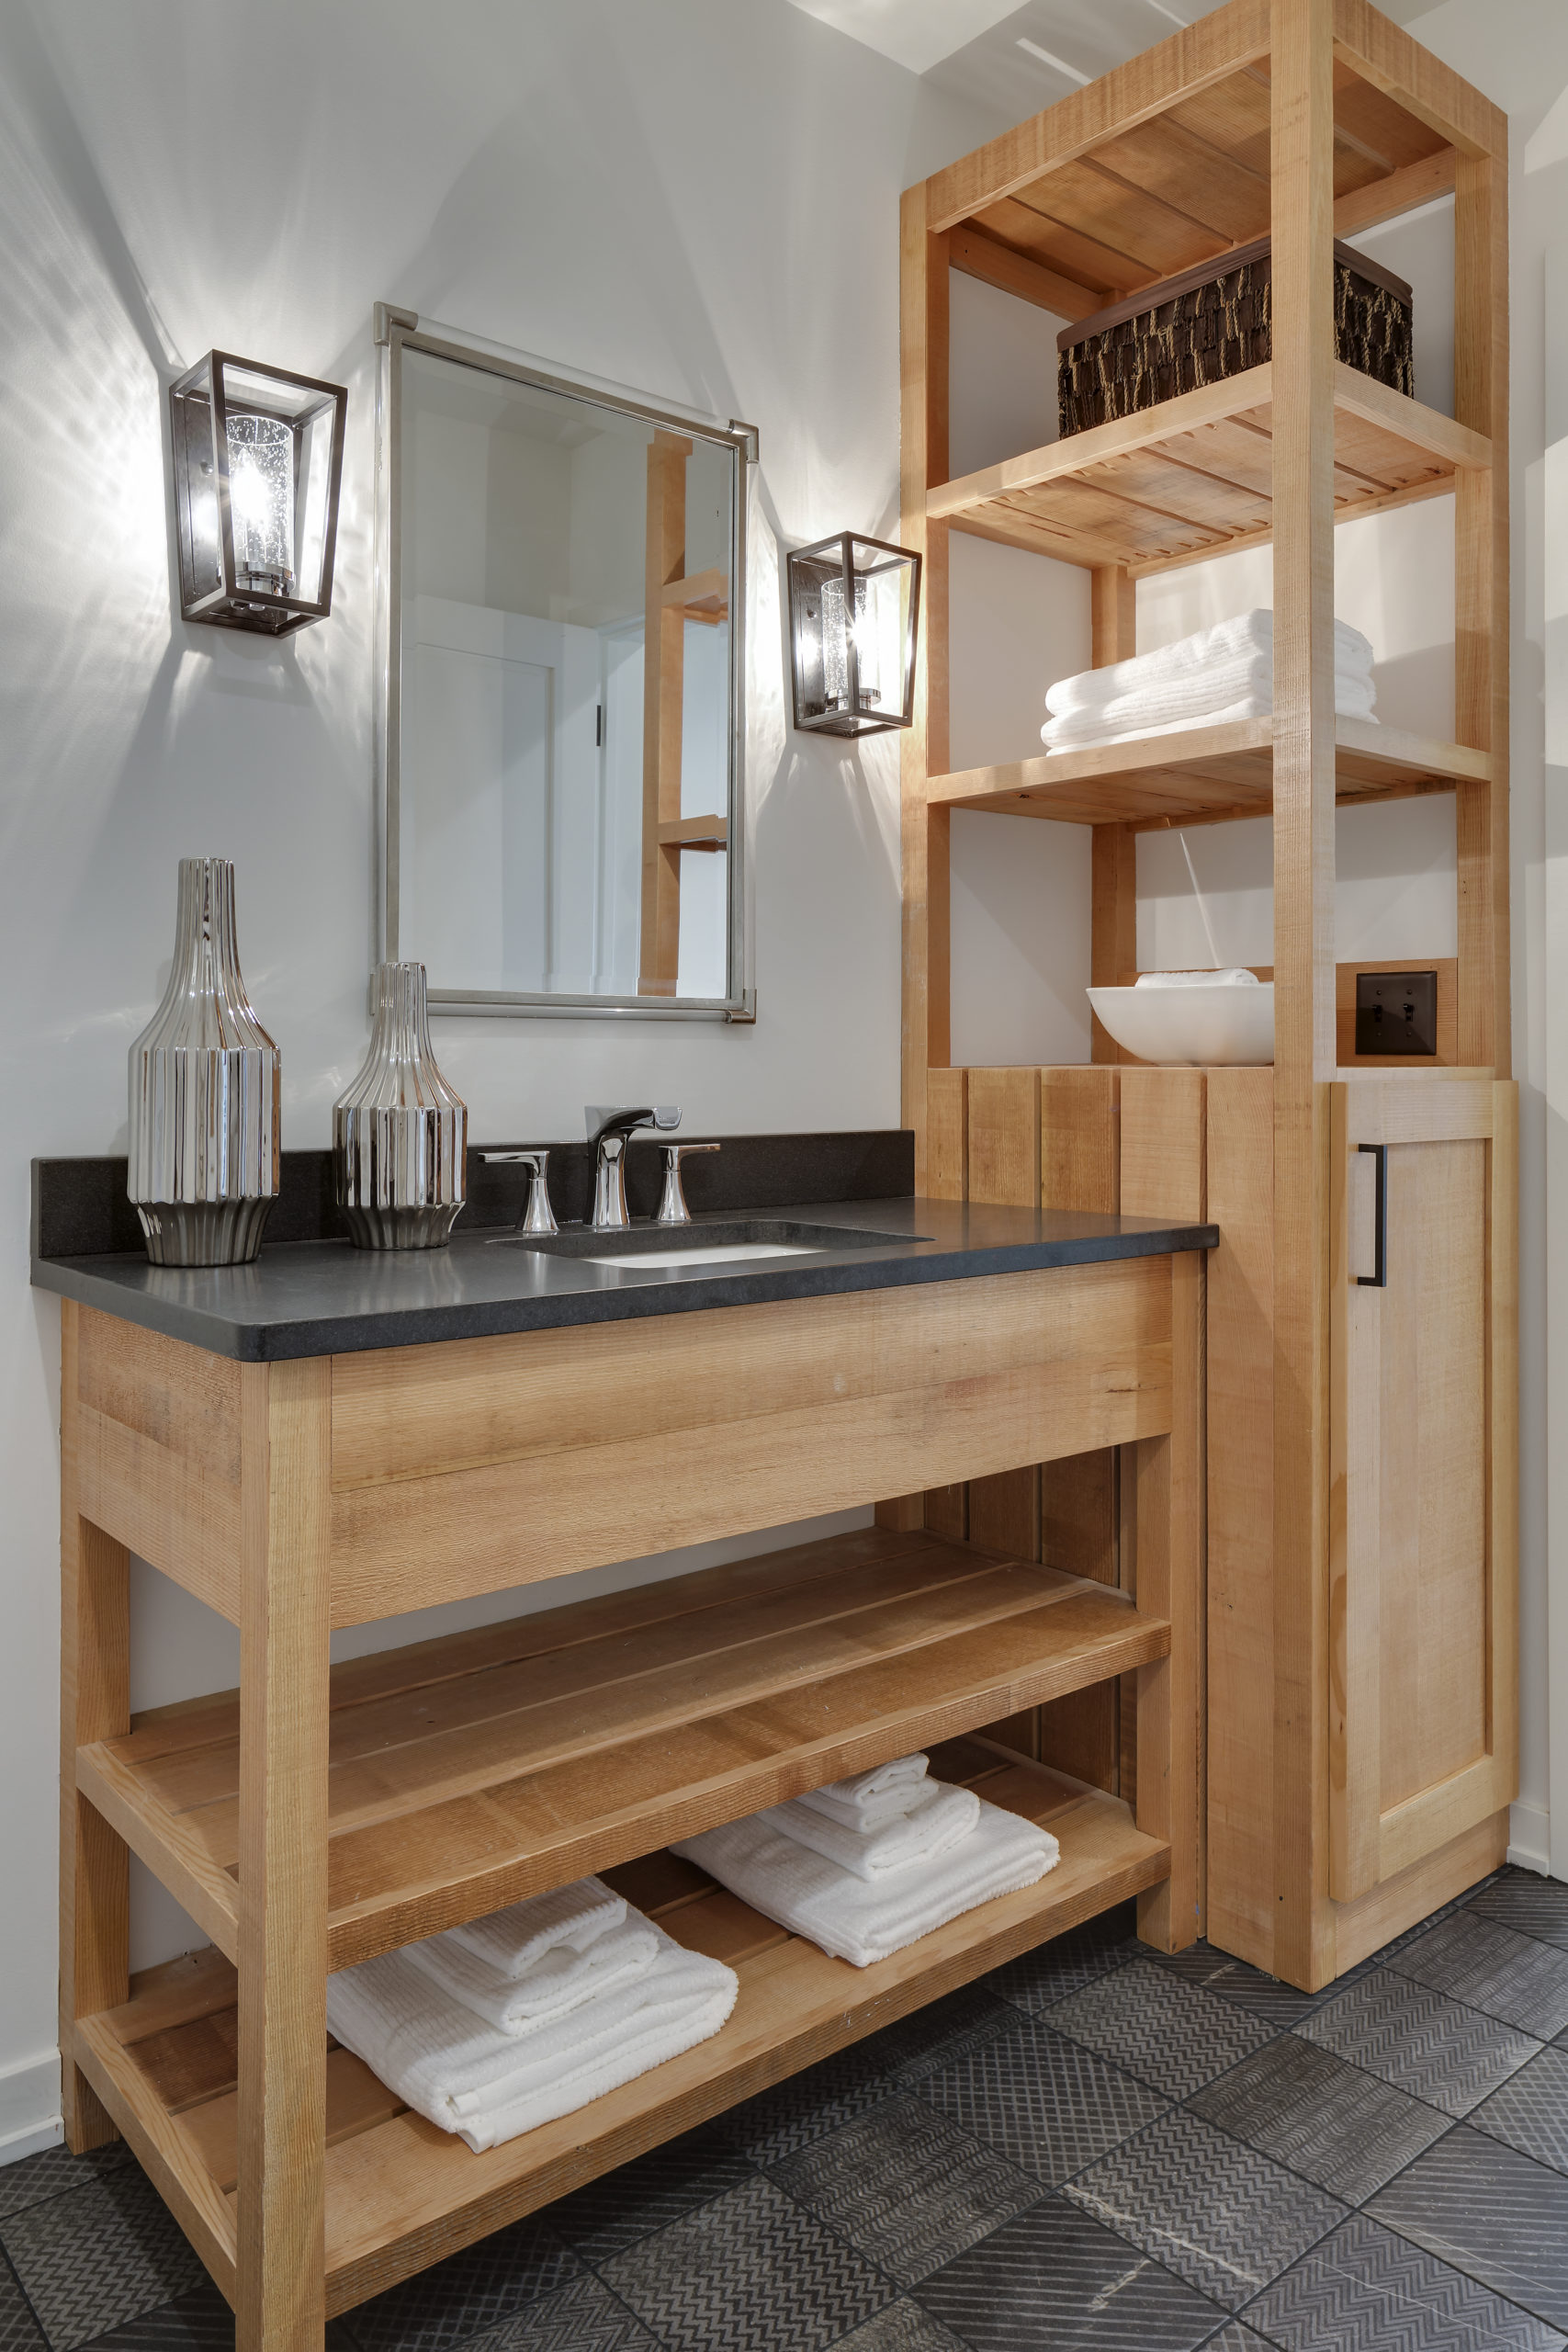 A bathroom with wooden shelves and towels.